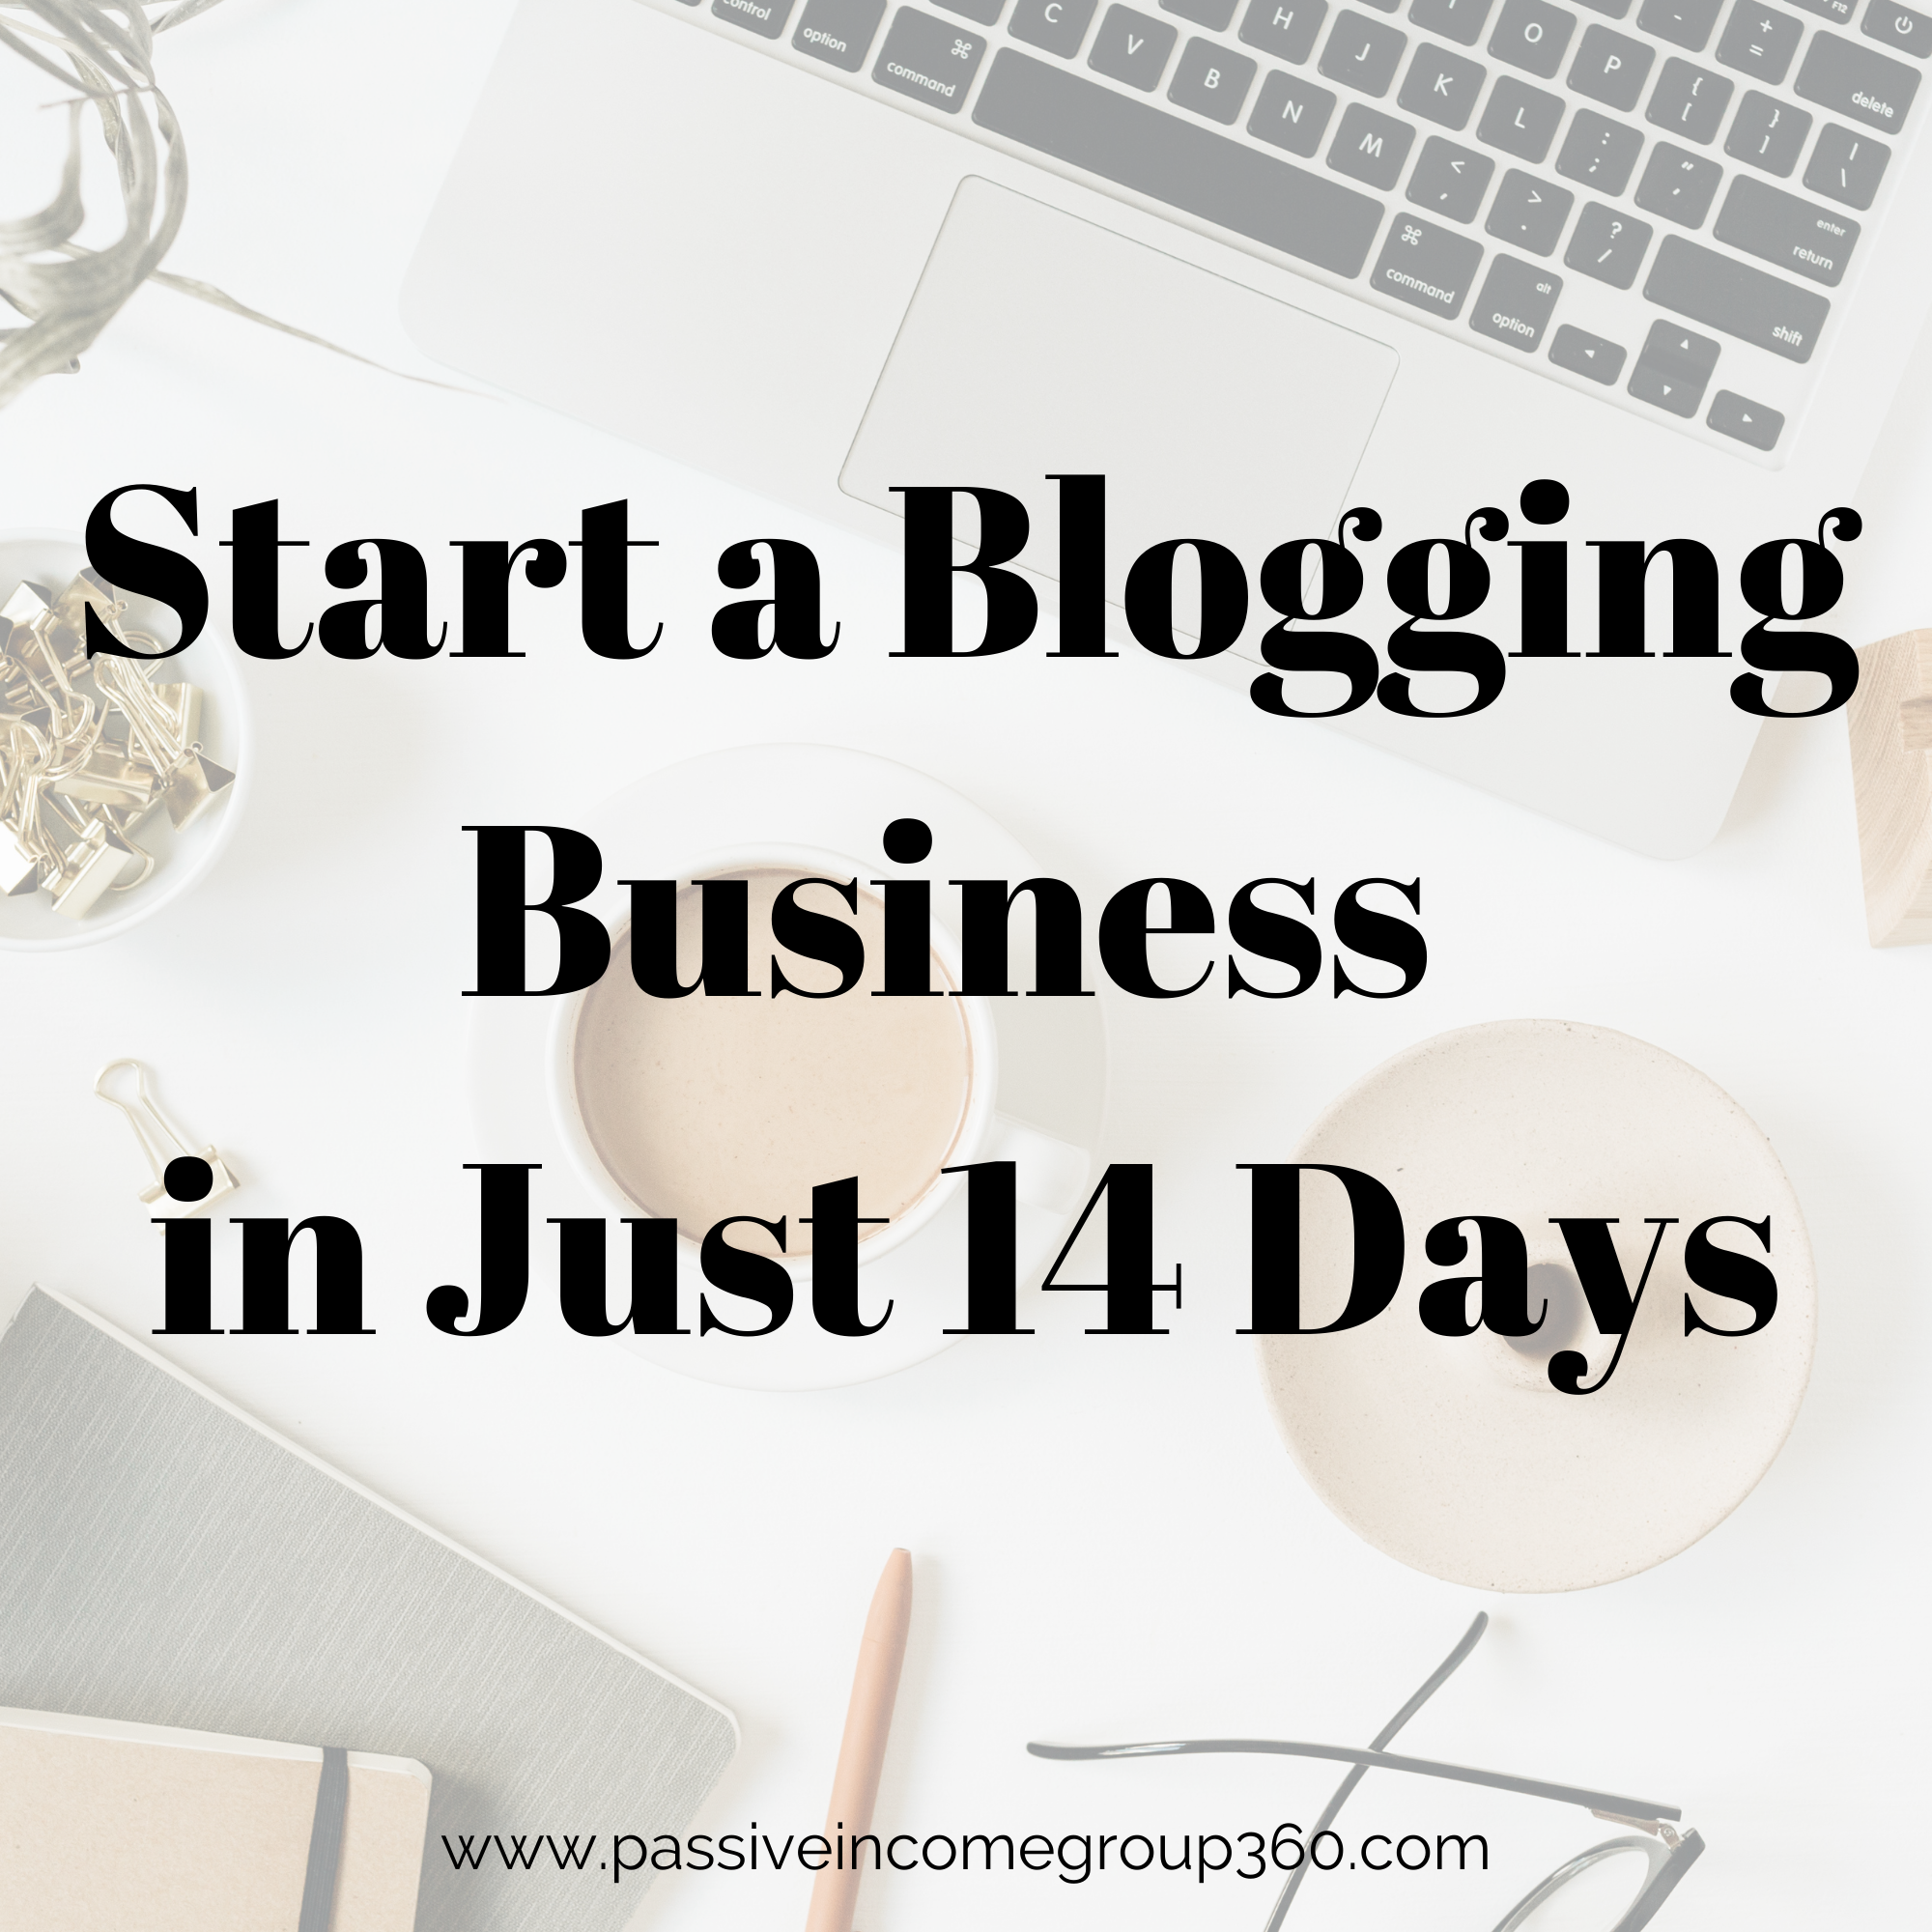 Start a Blogging Business in Just 14 Days